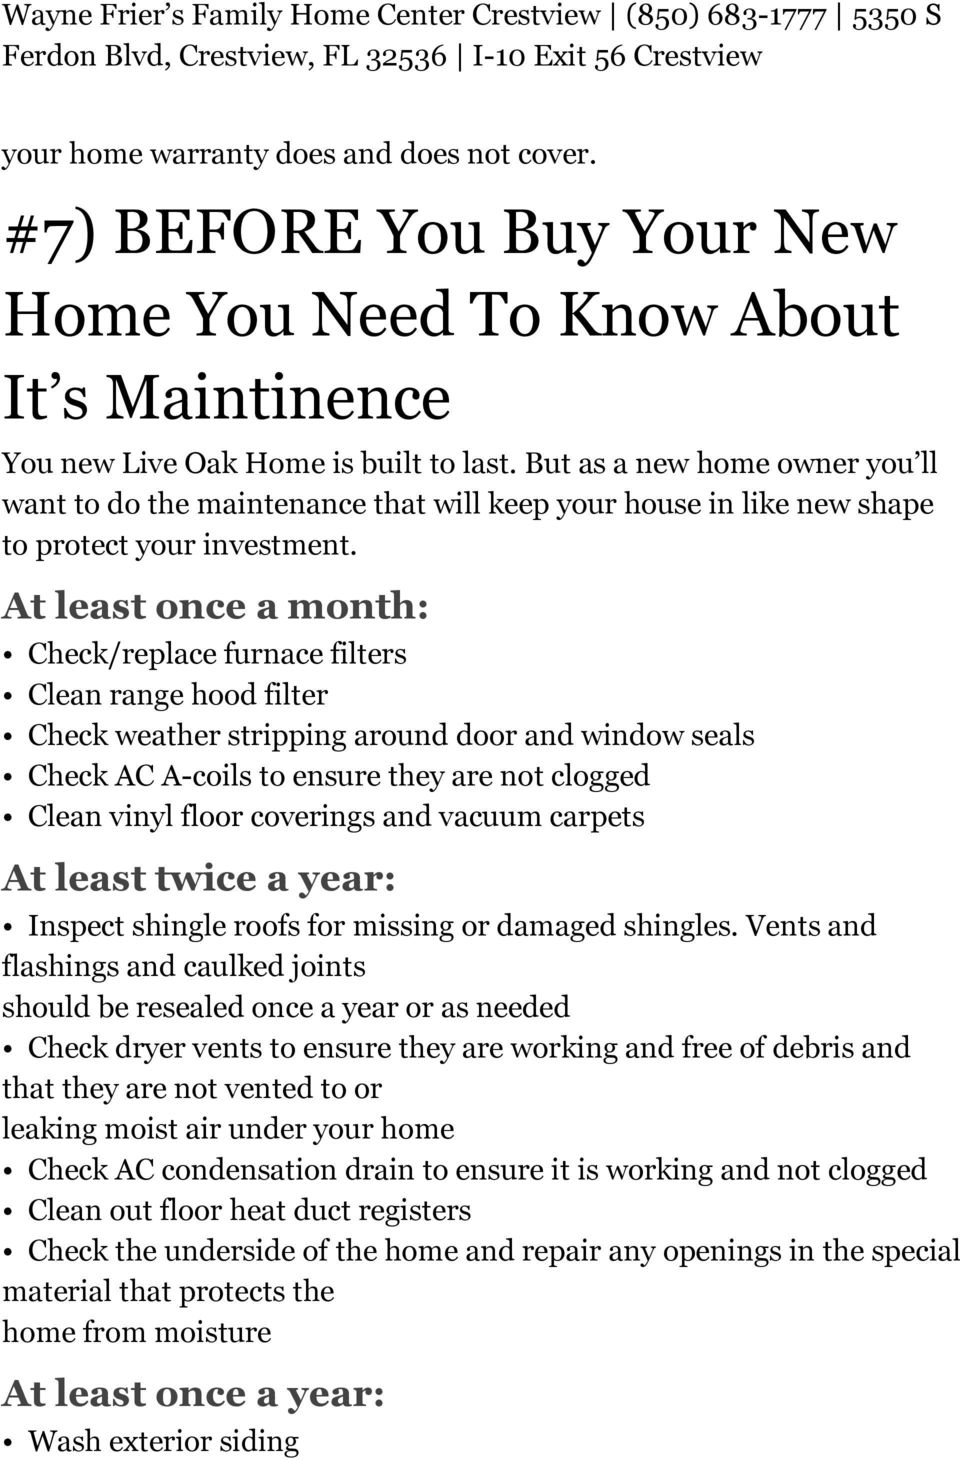 At least once a month: Check/replace furnace filters Clean range hood filter Check weather stripping around door and window seals Check AC A-coils to ensure they are not clogged Clean vinyl floor